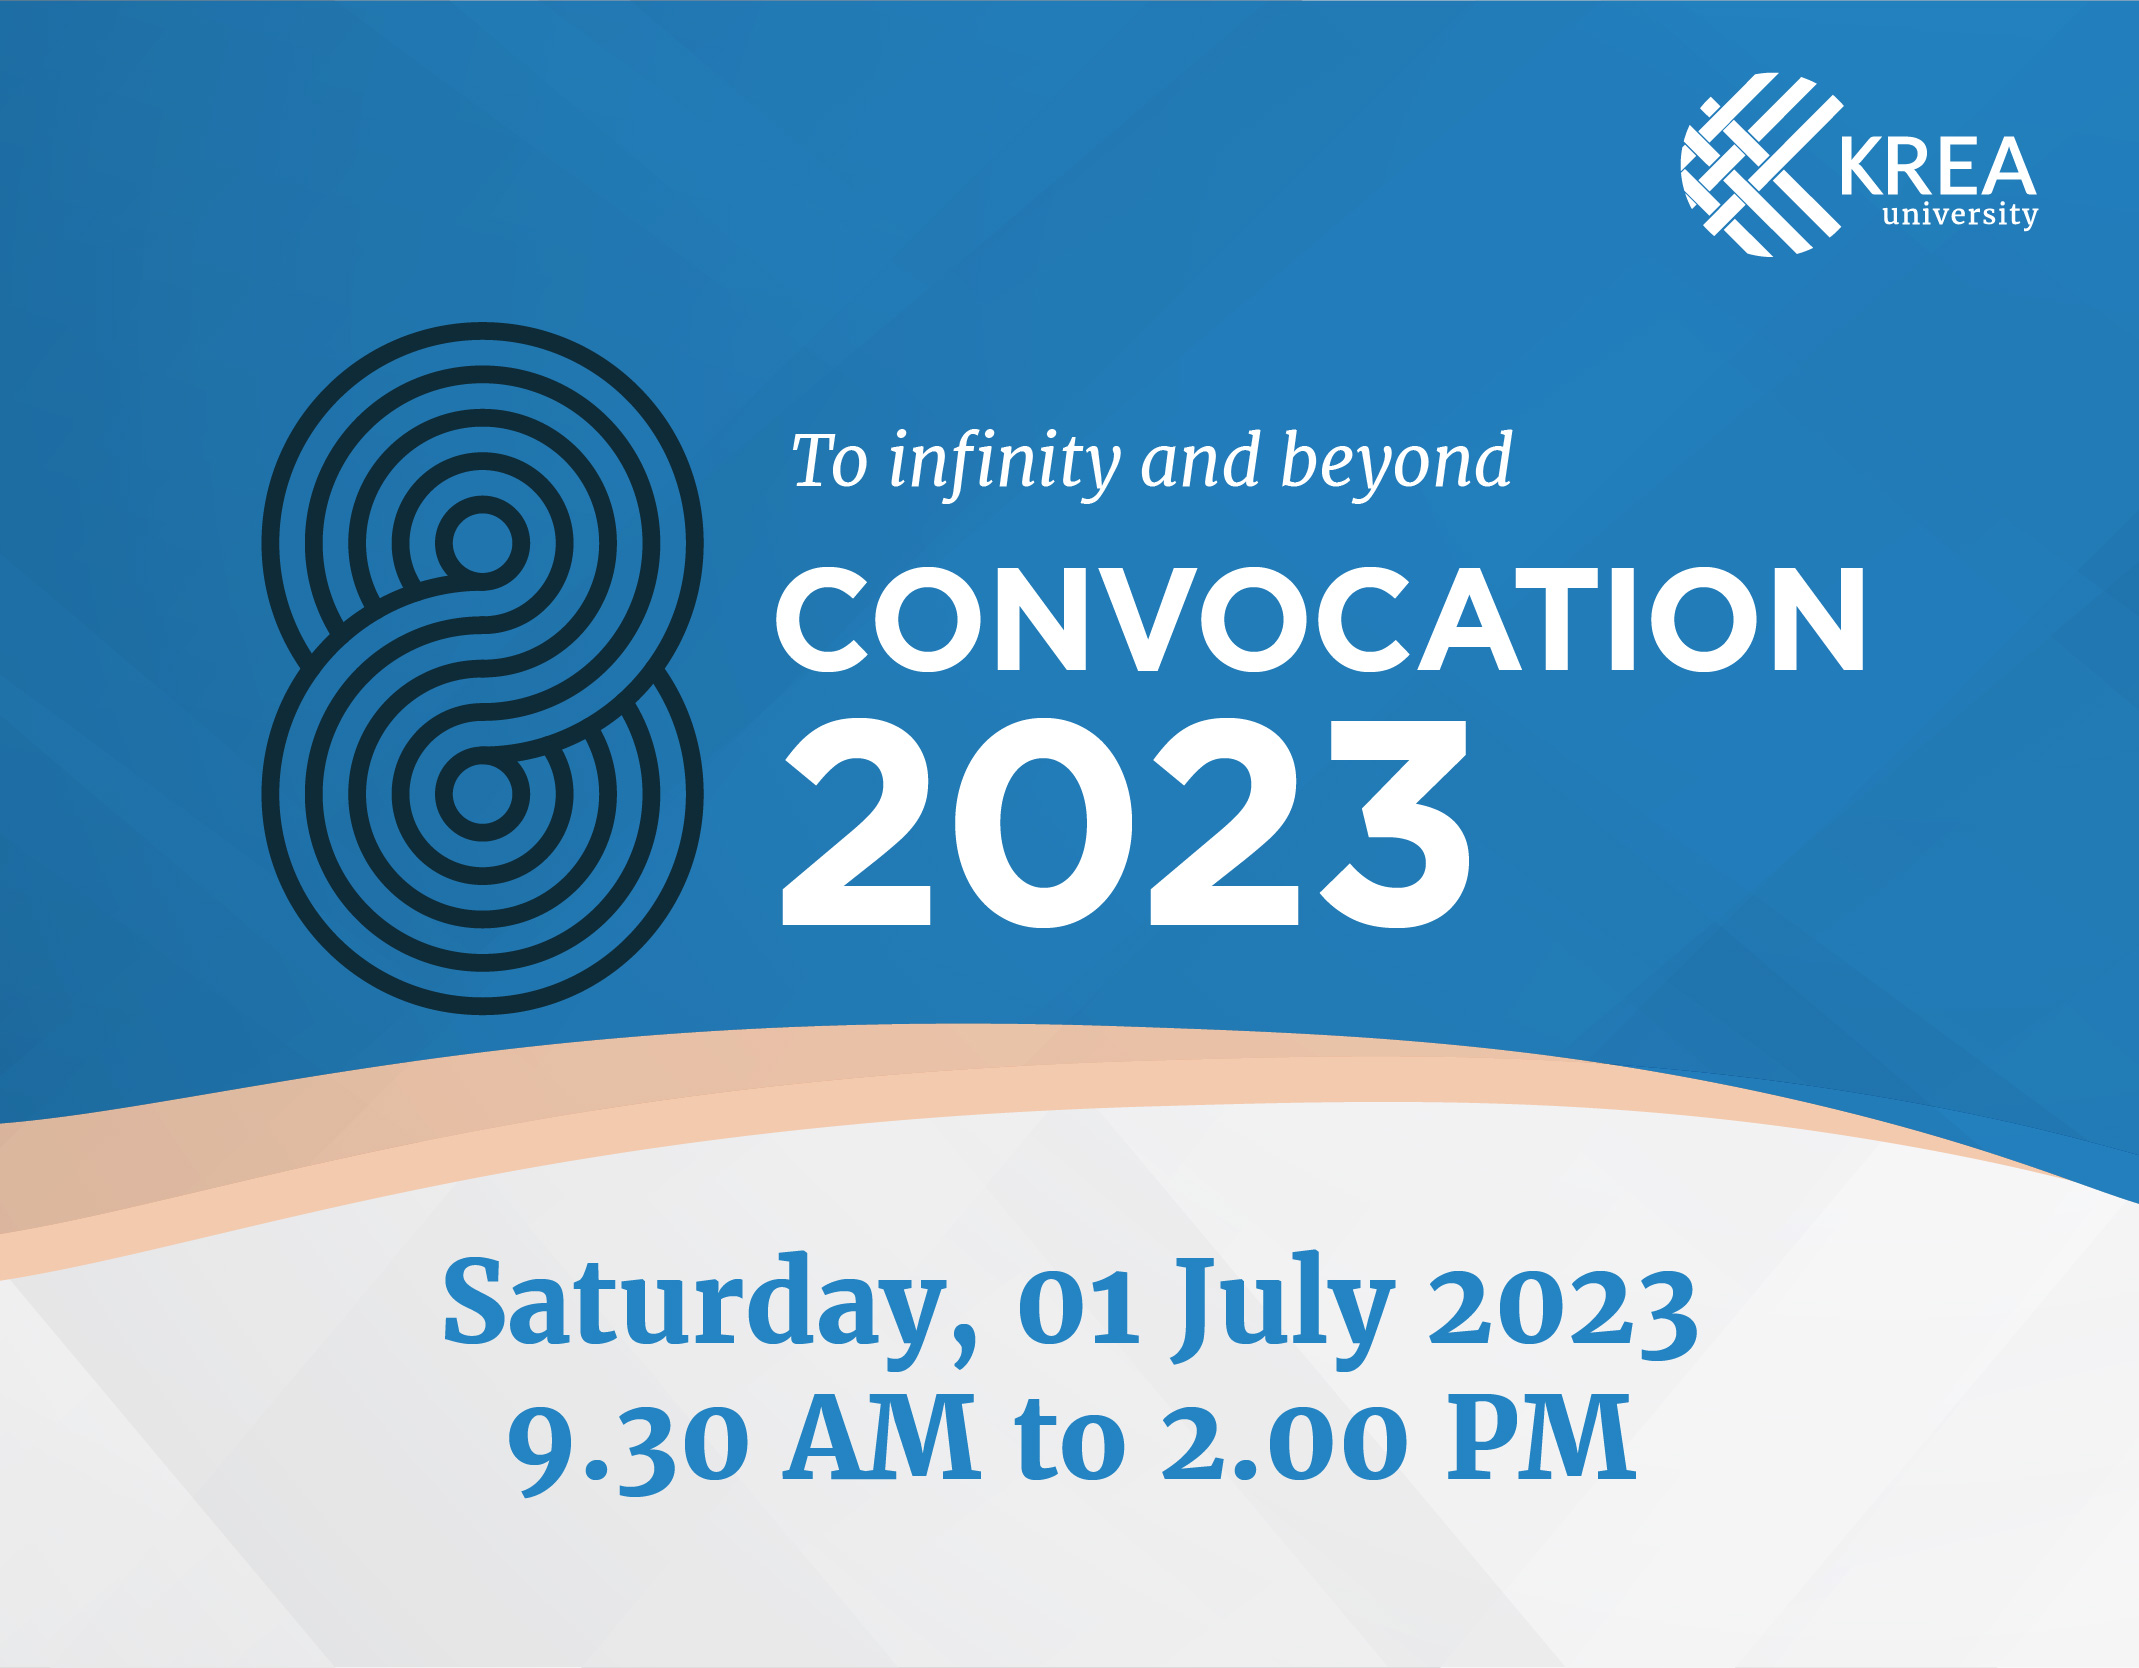 Counting down to the most anticipated event of the year -  Krea University's Convocation 2023